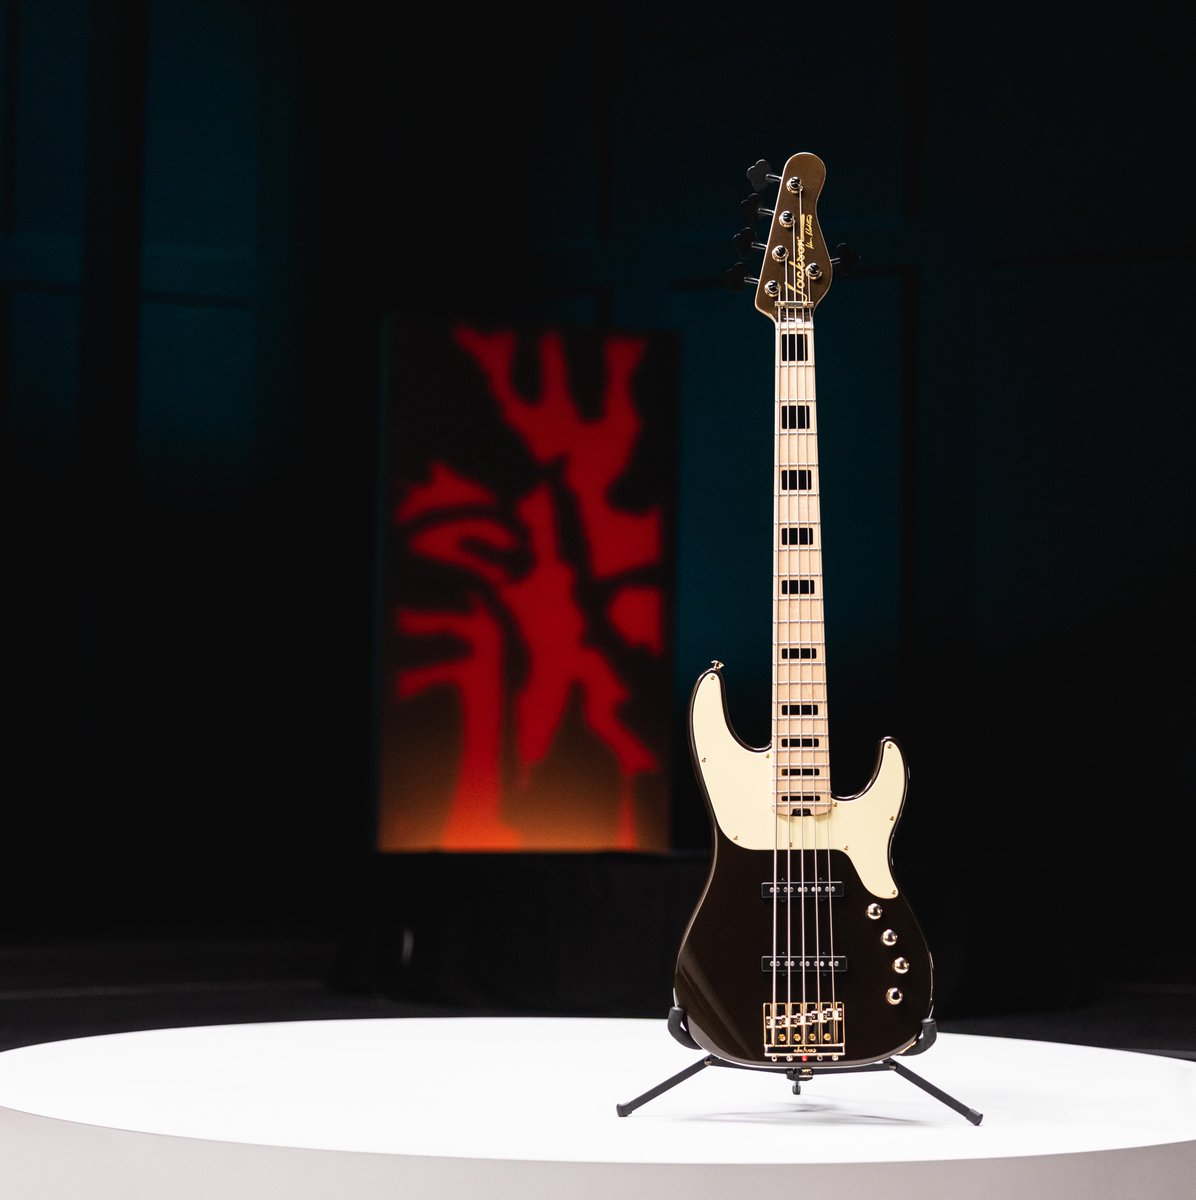 The heart of the Adam Blackstone Signature Concert five-string bass is the custom Jackson BBE J-style pickups, voiced to the artist specifications, paired with an active 3-band EQ circuit to dial in that perfect tone. See more: bit.ly/3V4Lx8Z